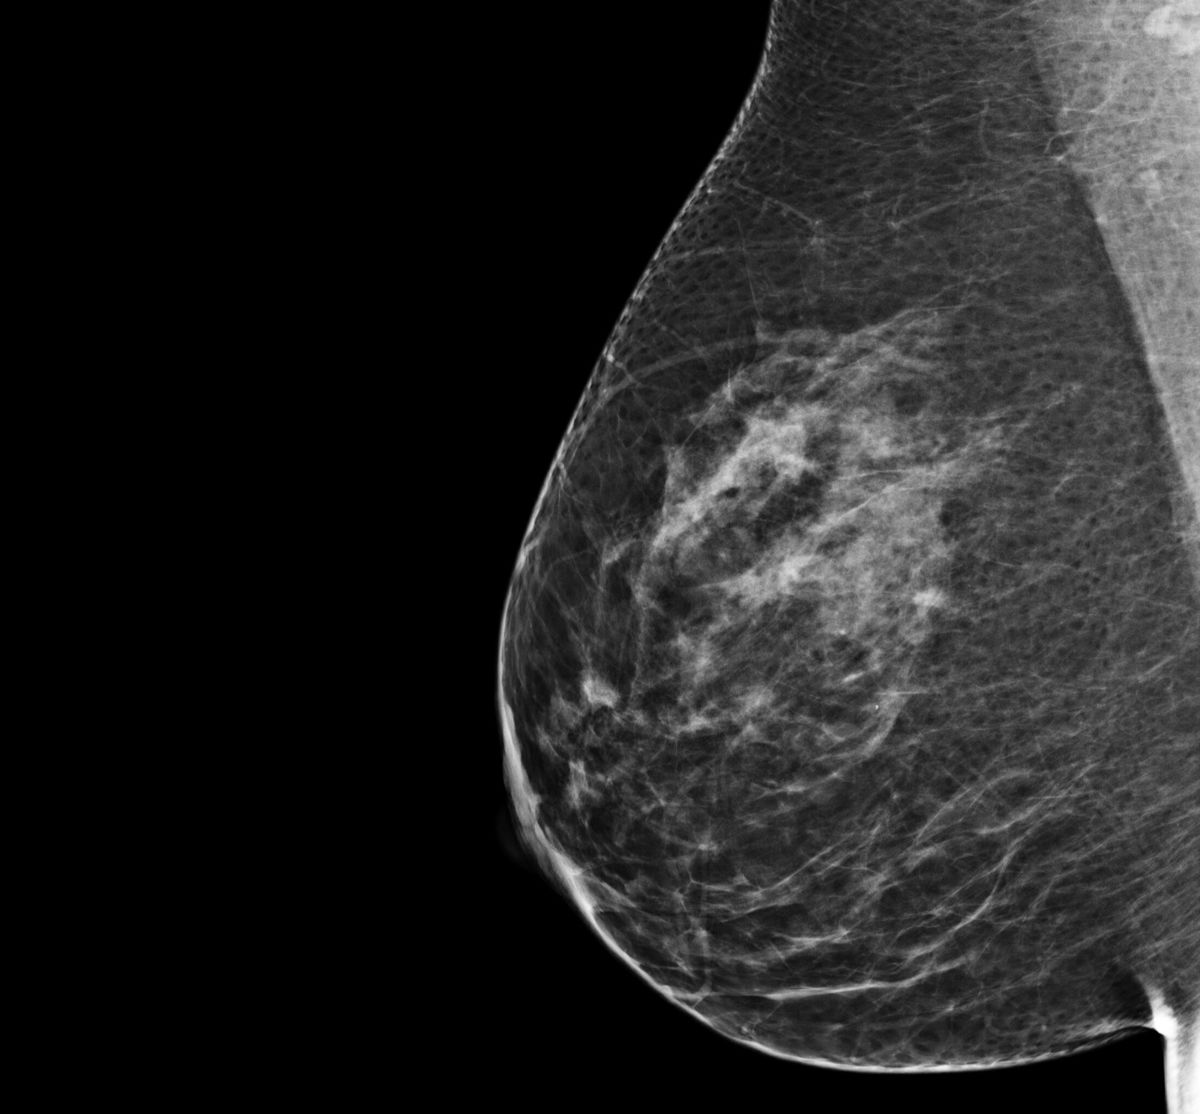 A mammogram image of category B breast tissue